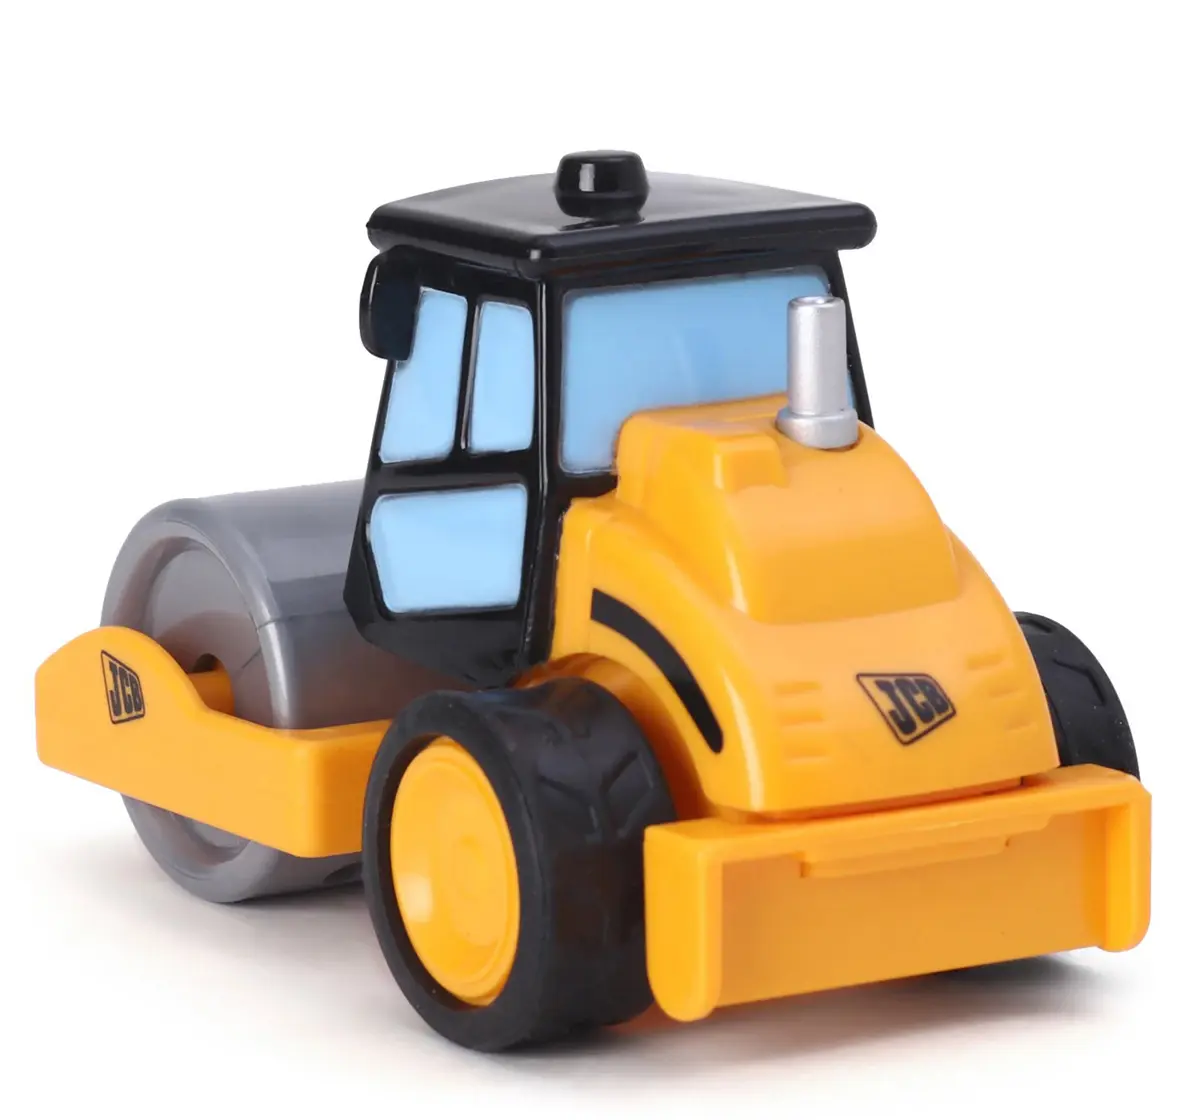 Jcb My First Rex The Roller, Pull Back Toy, Multicolour 12M+